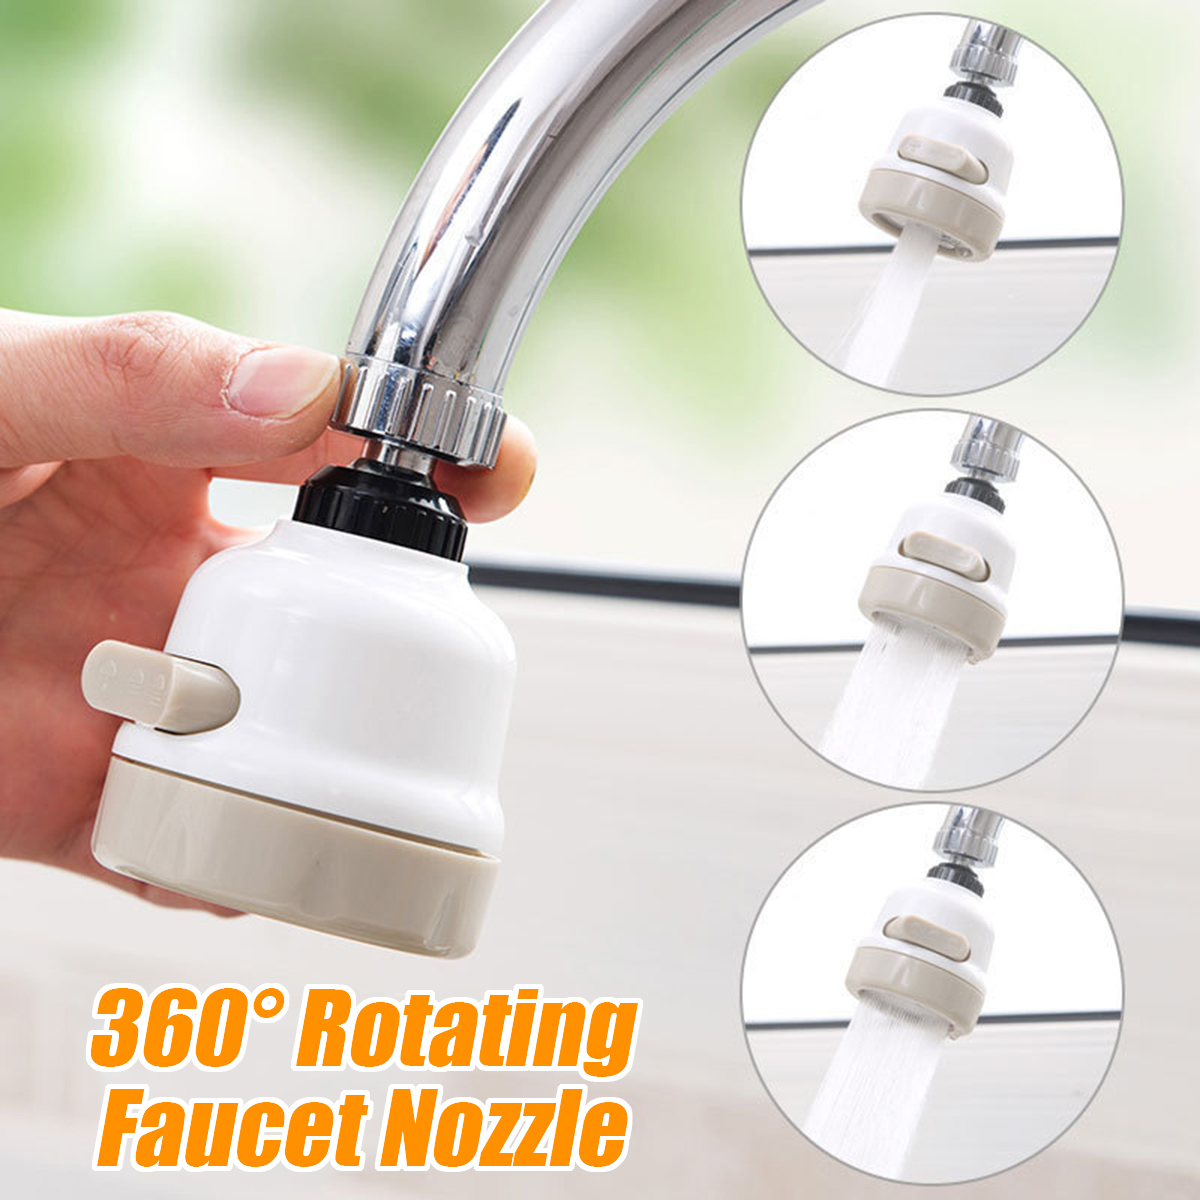 Booster Shower Kitchen eWater Filter Tap Head 360° Rotating Faucet Nozzle .